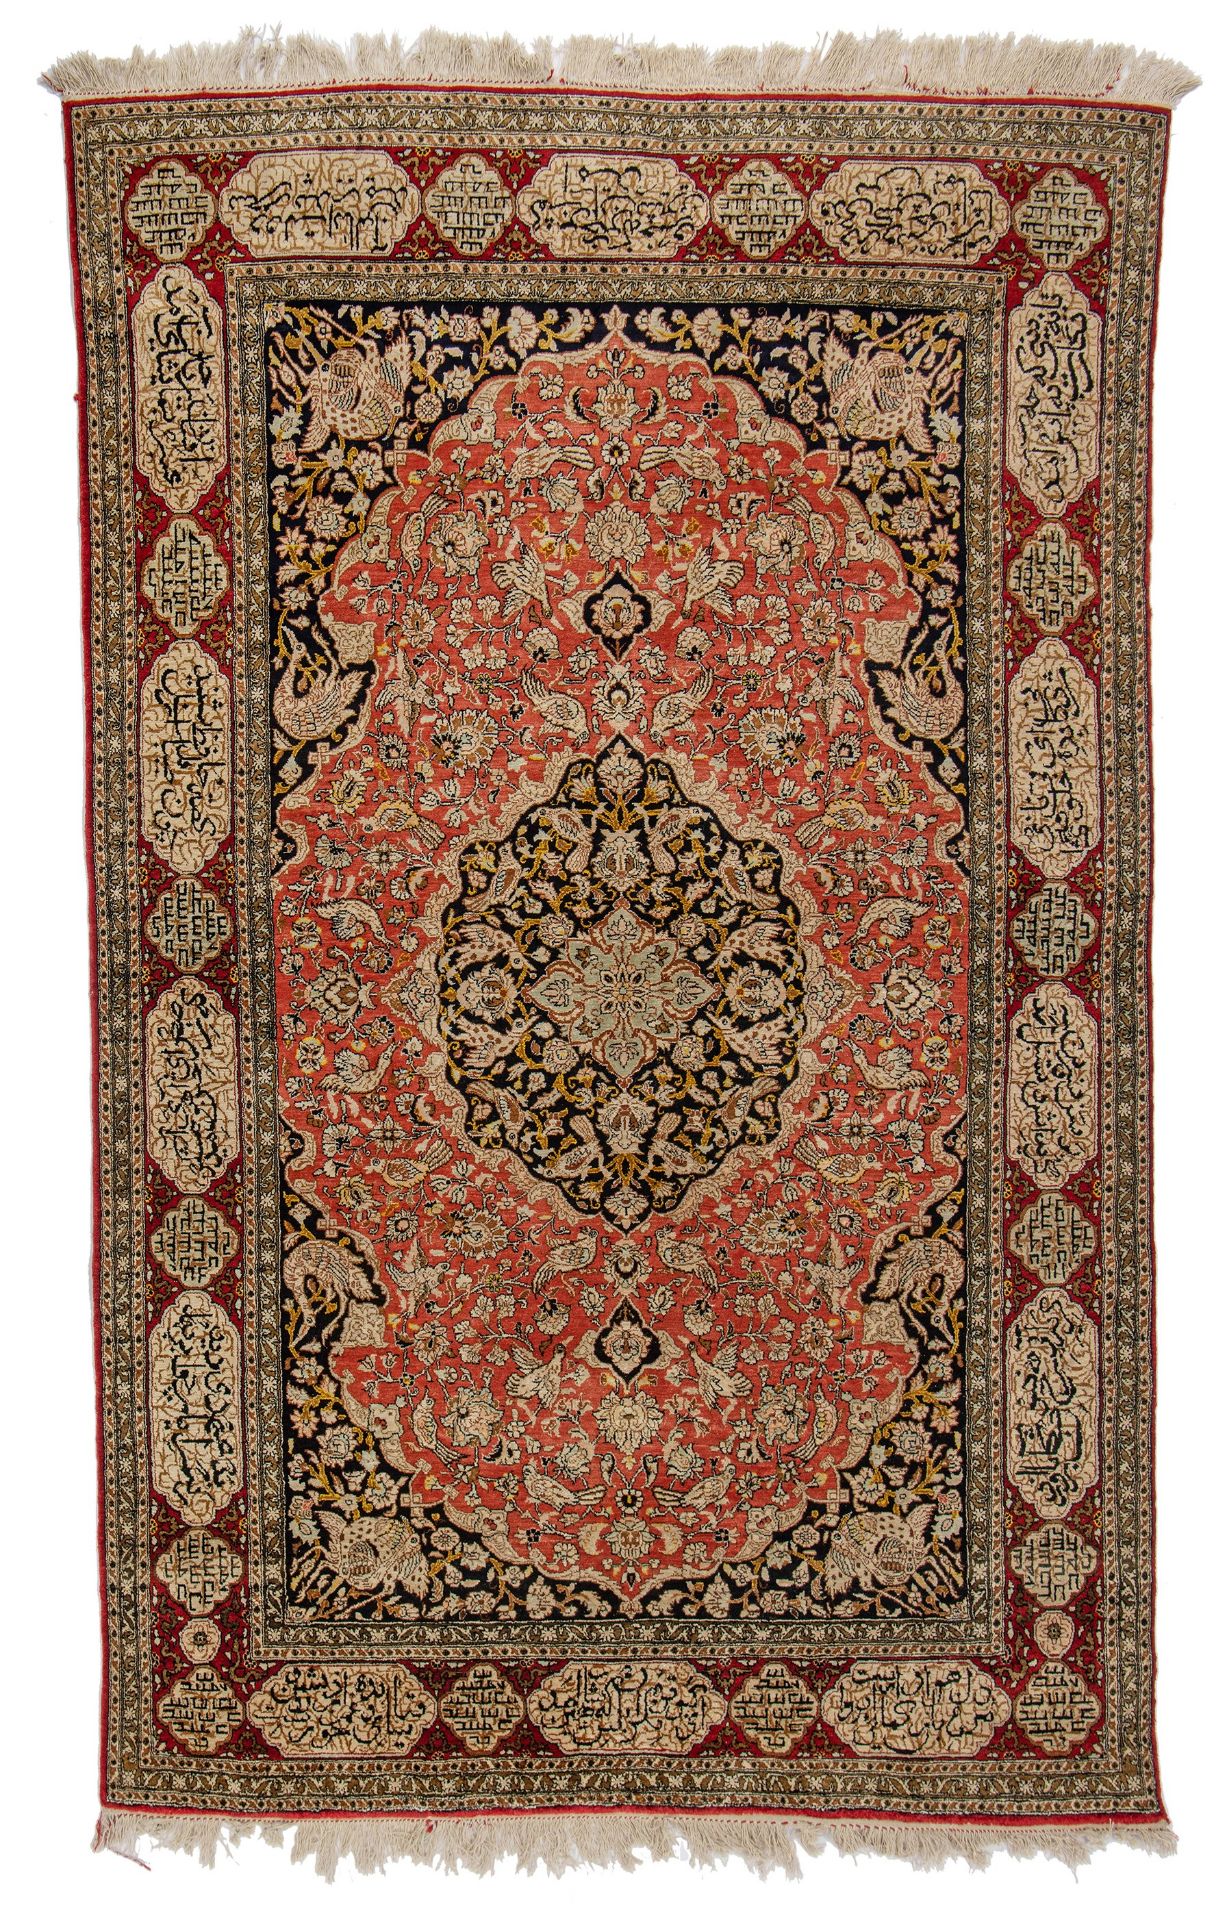 An Iran Ghoum carpet, floral decorated with birds, the borders with texts, silk, 137 x 216 cm